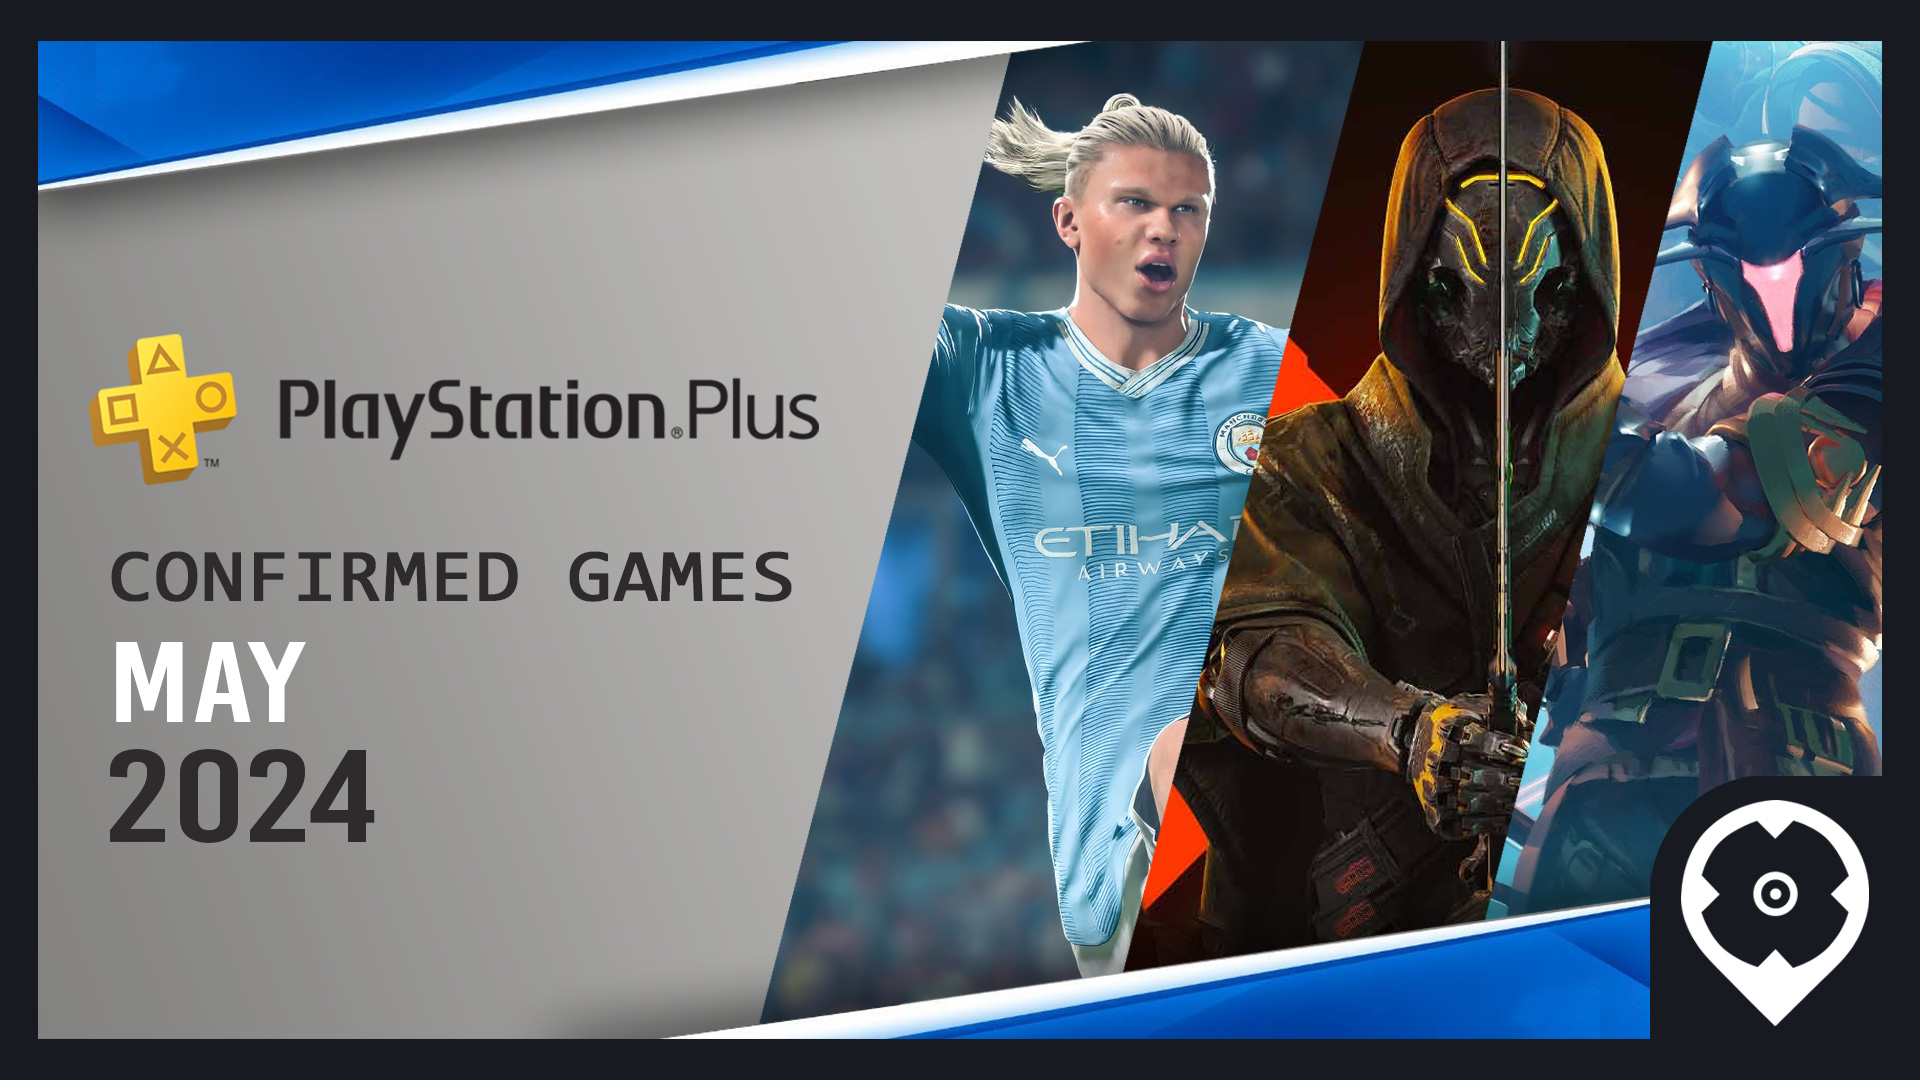 PlayStation Plus Free Games For May 2024 Confirmed